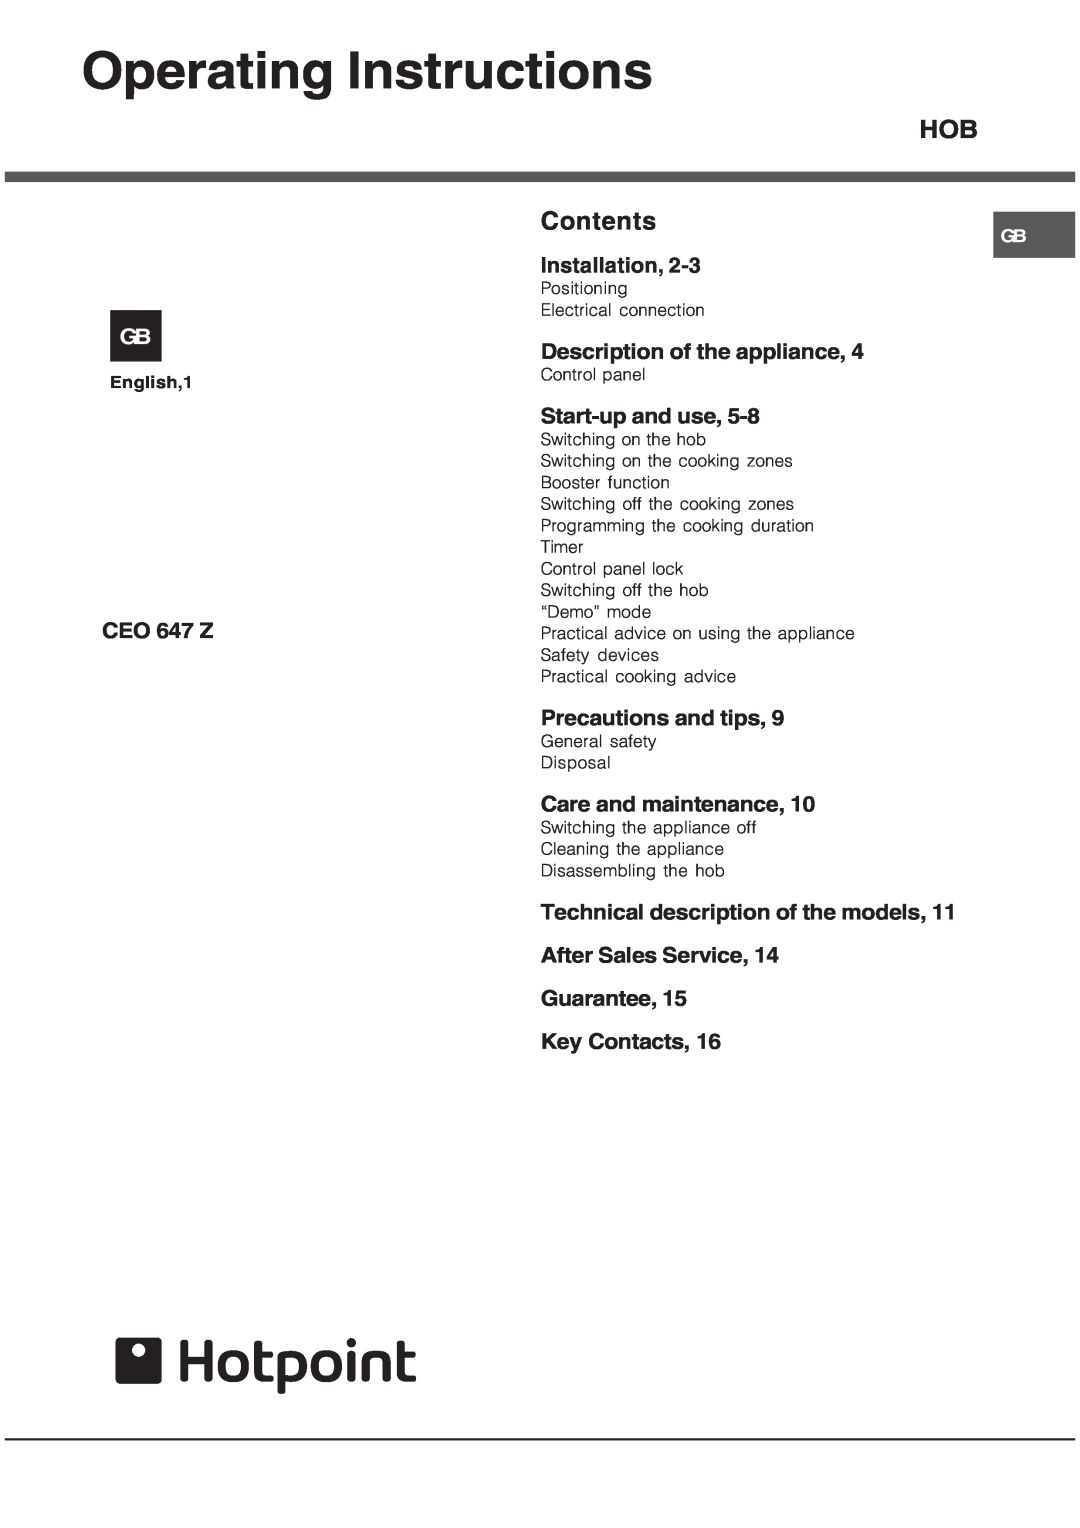 Hotpoint CEO 647 Z manual Operating Instructions, Installation, Description of the appliance, Start-upand use, Guarantee 